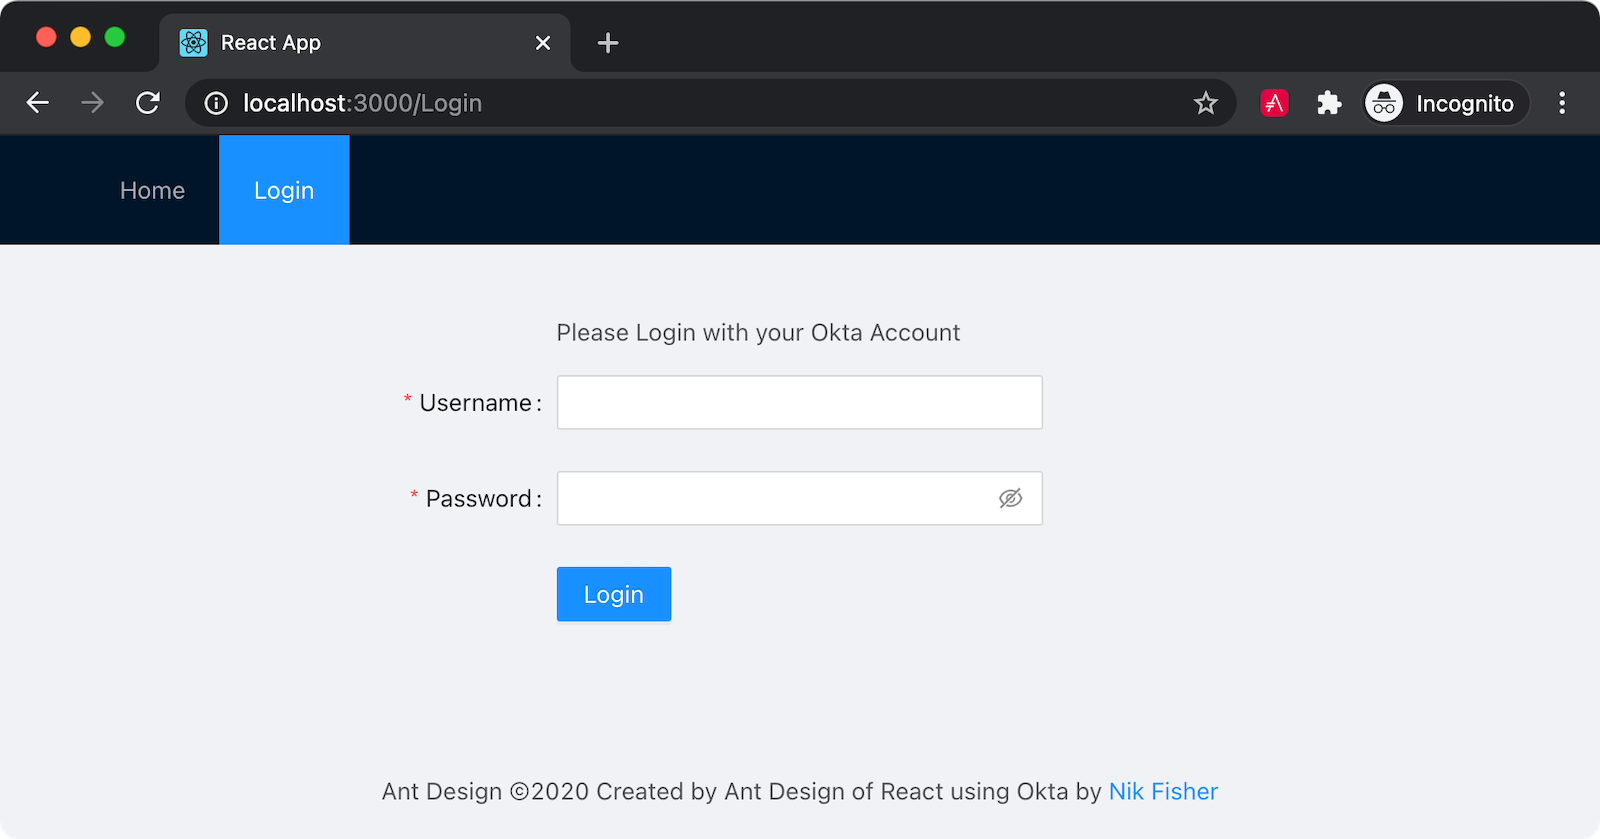 The login component